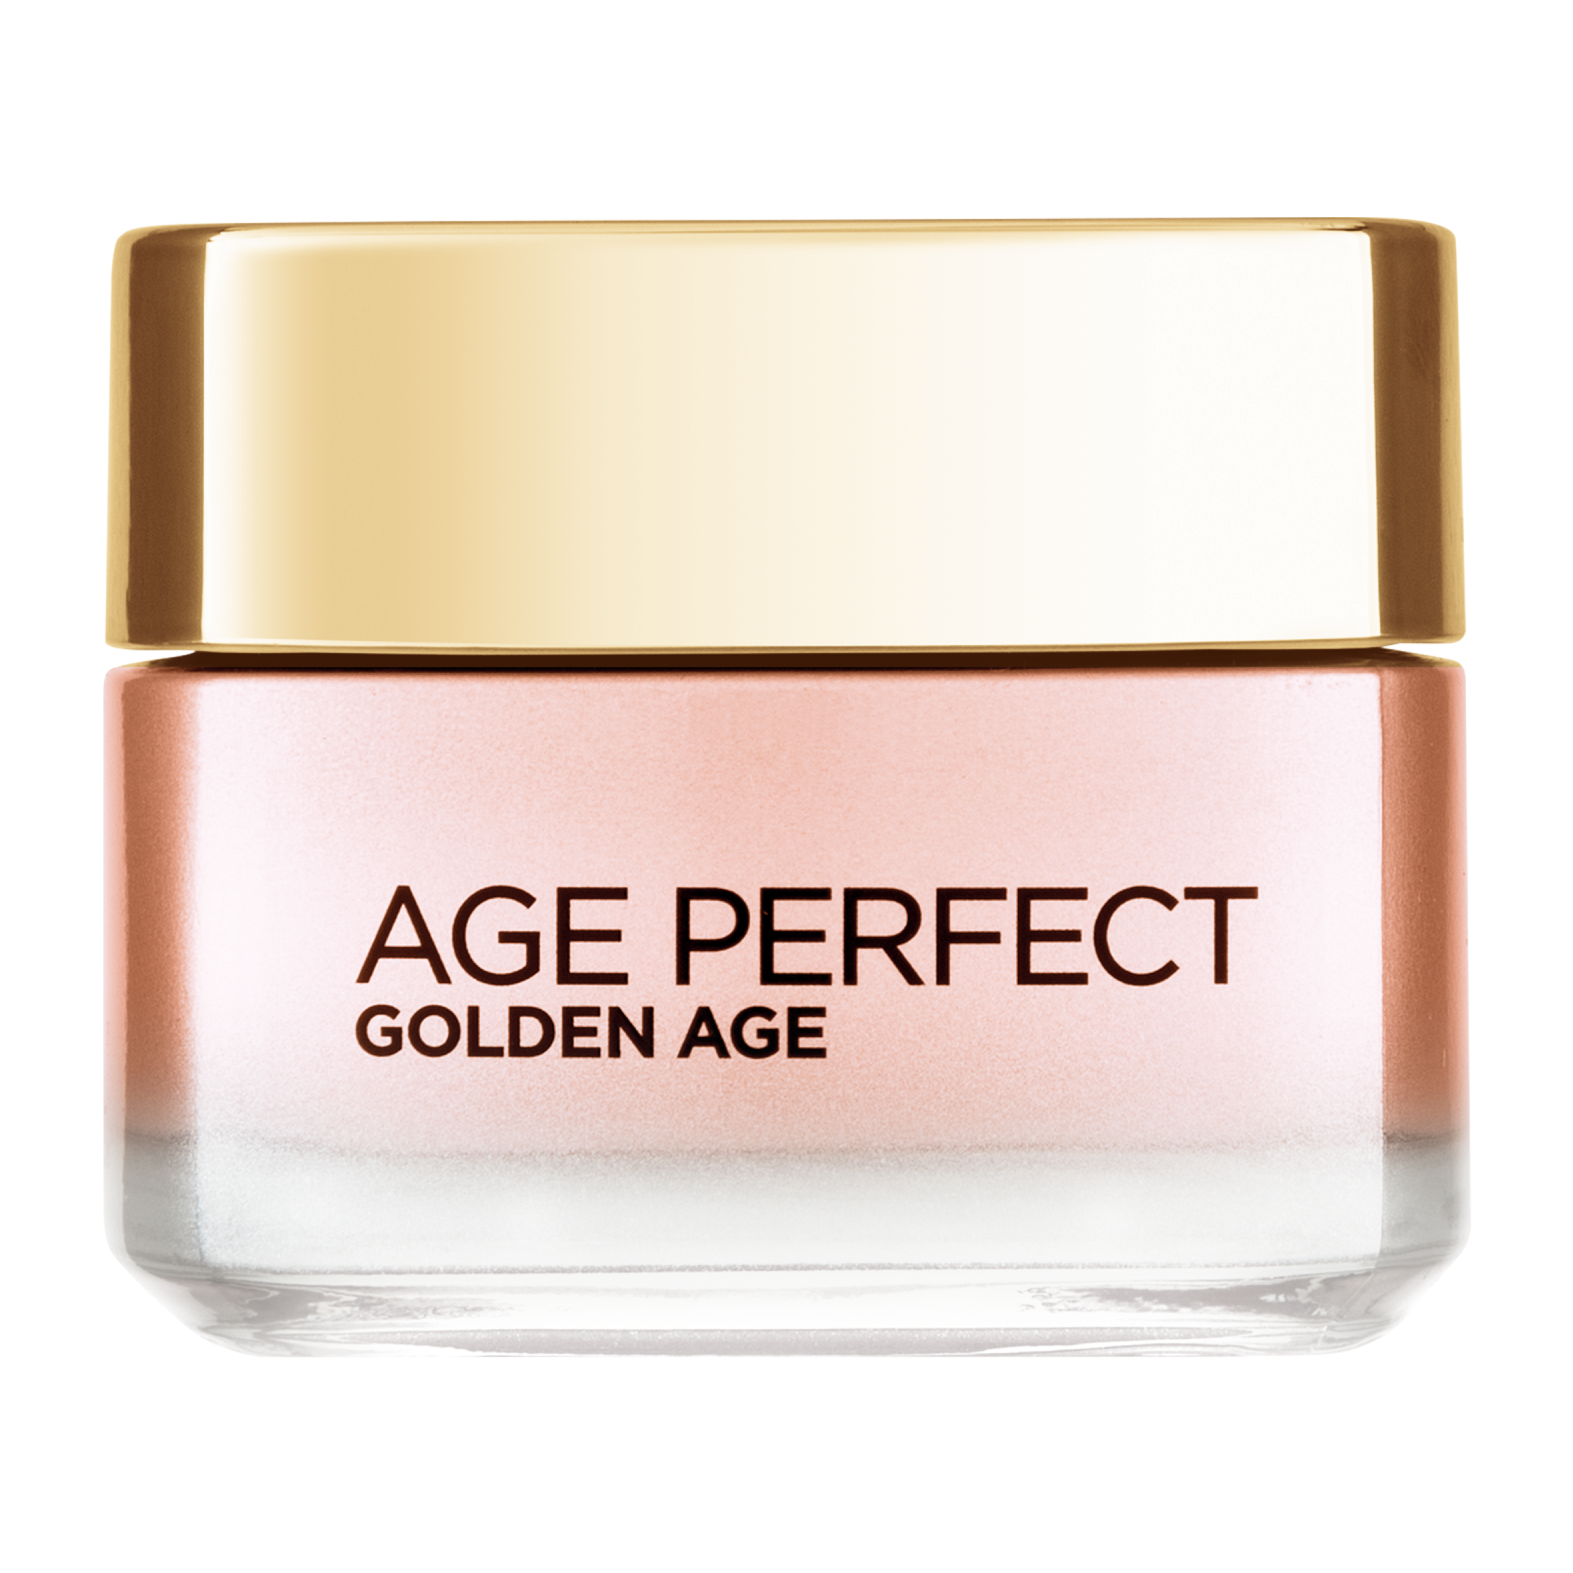 Age Perfect Golden Age Soin Rose